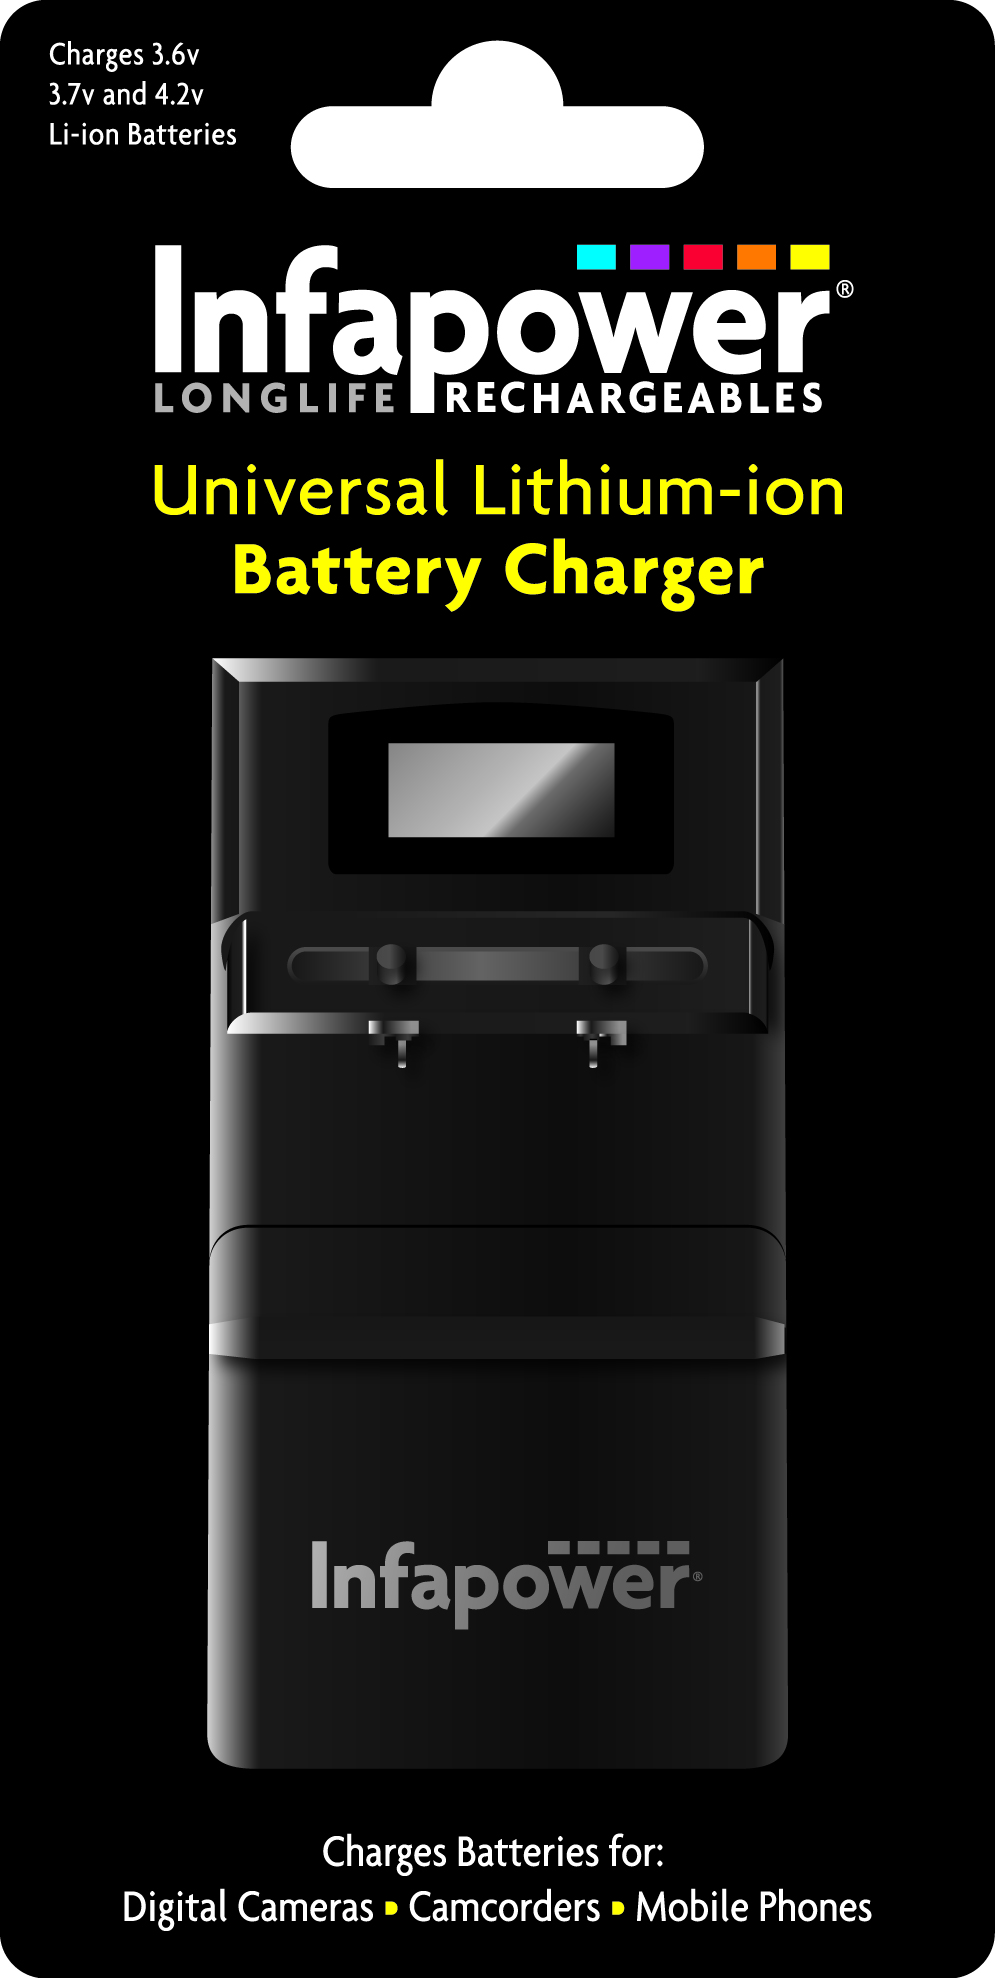 Infapower Universal Lithium-Ion Battery Charger